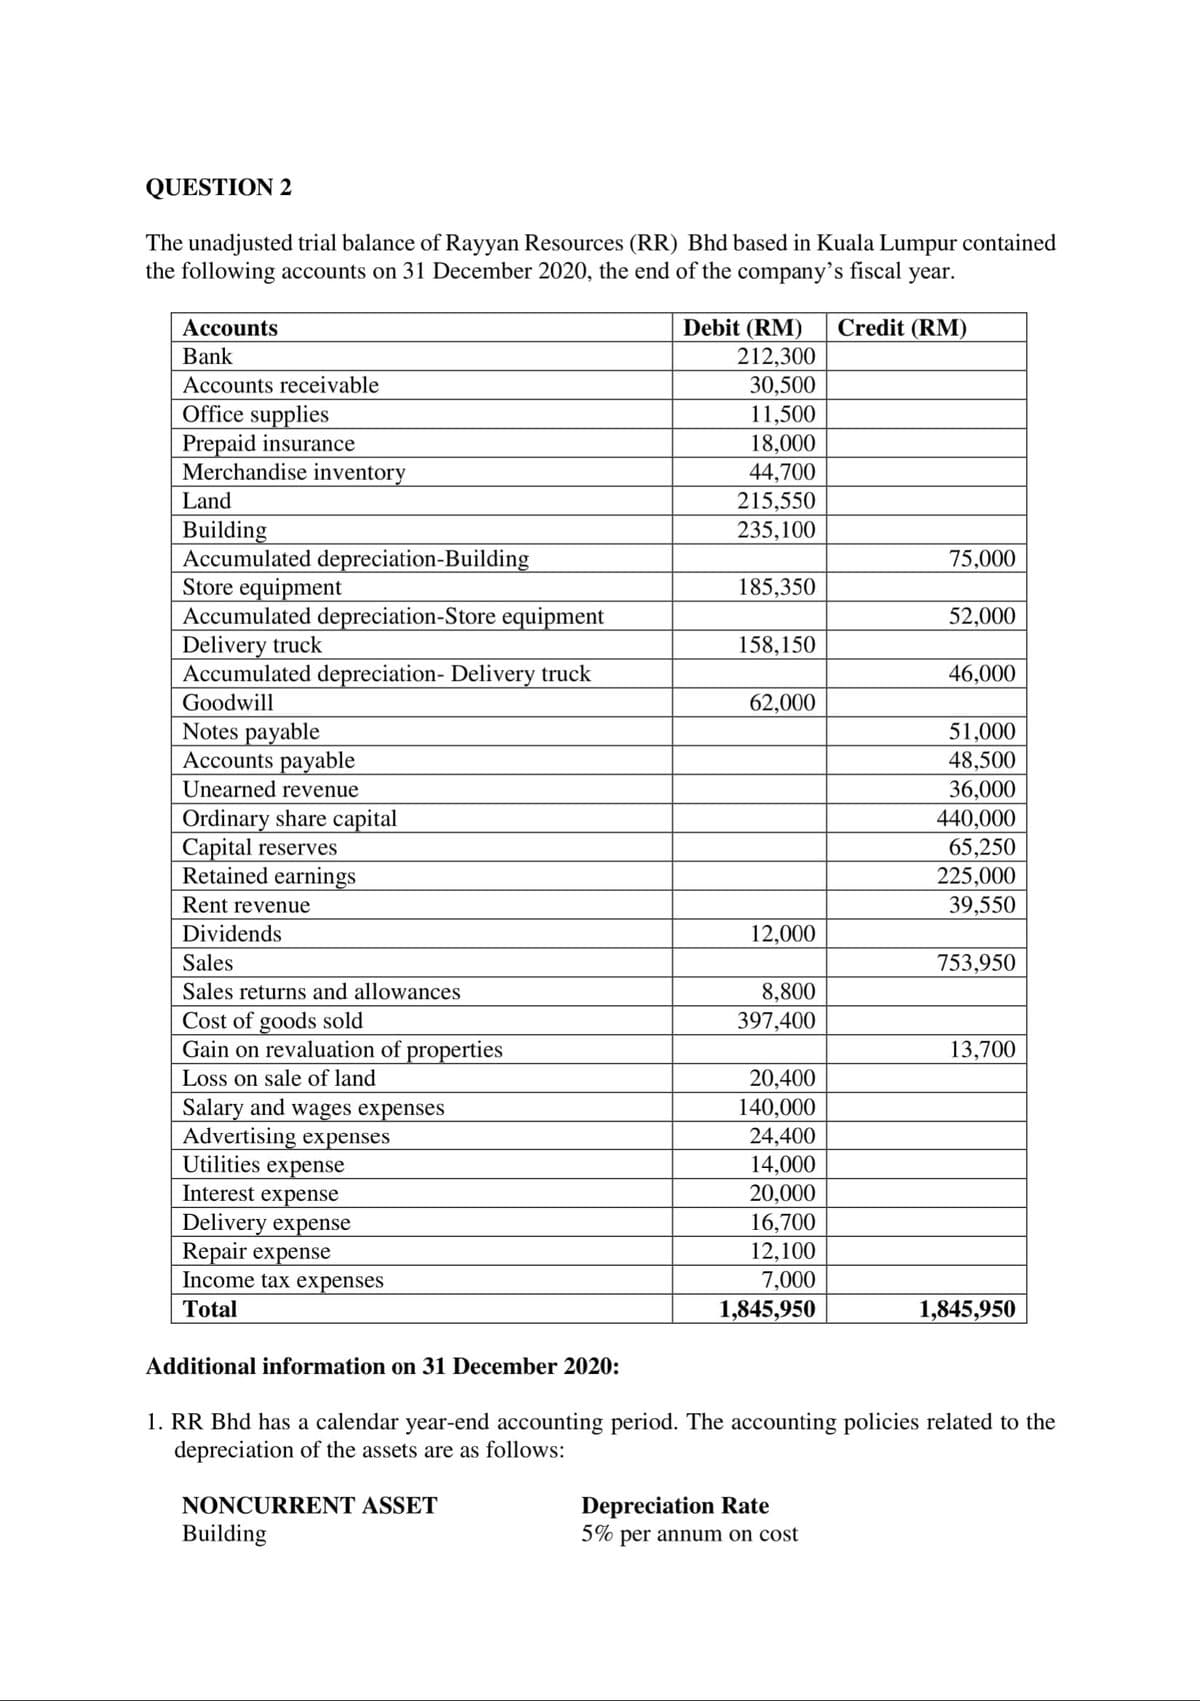 QUESTION 2
The unadjusted trial balance of Rayyan Resources (RR) Bhd based in Kuala Lumpur contained
the following accounts on 31 December 2020, the end of the company's fiscal year.
Debit (RM)
212,300
30,500
Accounts
Credit (RM)
Bank
Accounts receivable
Office supplies
Prepaid insurance
Merchandise inventory
11,500
18,000
44,700
215,550
235,100
Land
Building
Accumulated depreciation-Building
Store equipment
Accumulated depreciation-Store equipment
Delivery truck
Accumulated depreciation- Delivery truck
75,000
185,350
52,000
158,150
46,000
Goodwill
62,000
Notes payable
Accounts payable
Unearned revenue
51,000
48,500
36,000
440,000
65,250
Ordinary share capital
Capital reserves
Retained earnings
225,000
Rent revenue
39,550
Dividends
12,000
Sales
753,950
8,800
397,400
Sales returns and allowances
Cost of goods sold
Gain on revaluation of properties
13,700
Loss on sale of land
20,400
Salary and wages expenses
Advertising expenses
Utilities expense
Interest expense
Delivery expense
Repair expense
Income tax expenses
140,000
24,400
14,000
20,000
16,700
12,100
7,000
1,845,950
Total
1,845,950
Additional information on 31 December 2020:
1. RR Bhd has a calendar year-end accounting period. The accounting policies related to the
depreciation of the assets are as follows:
Depreciation Rate
5% per annum on cost
NONCURRENT ASSET
Building
